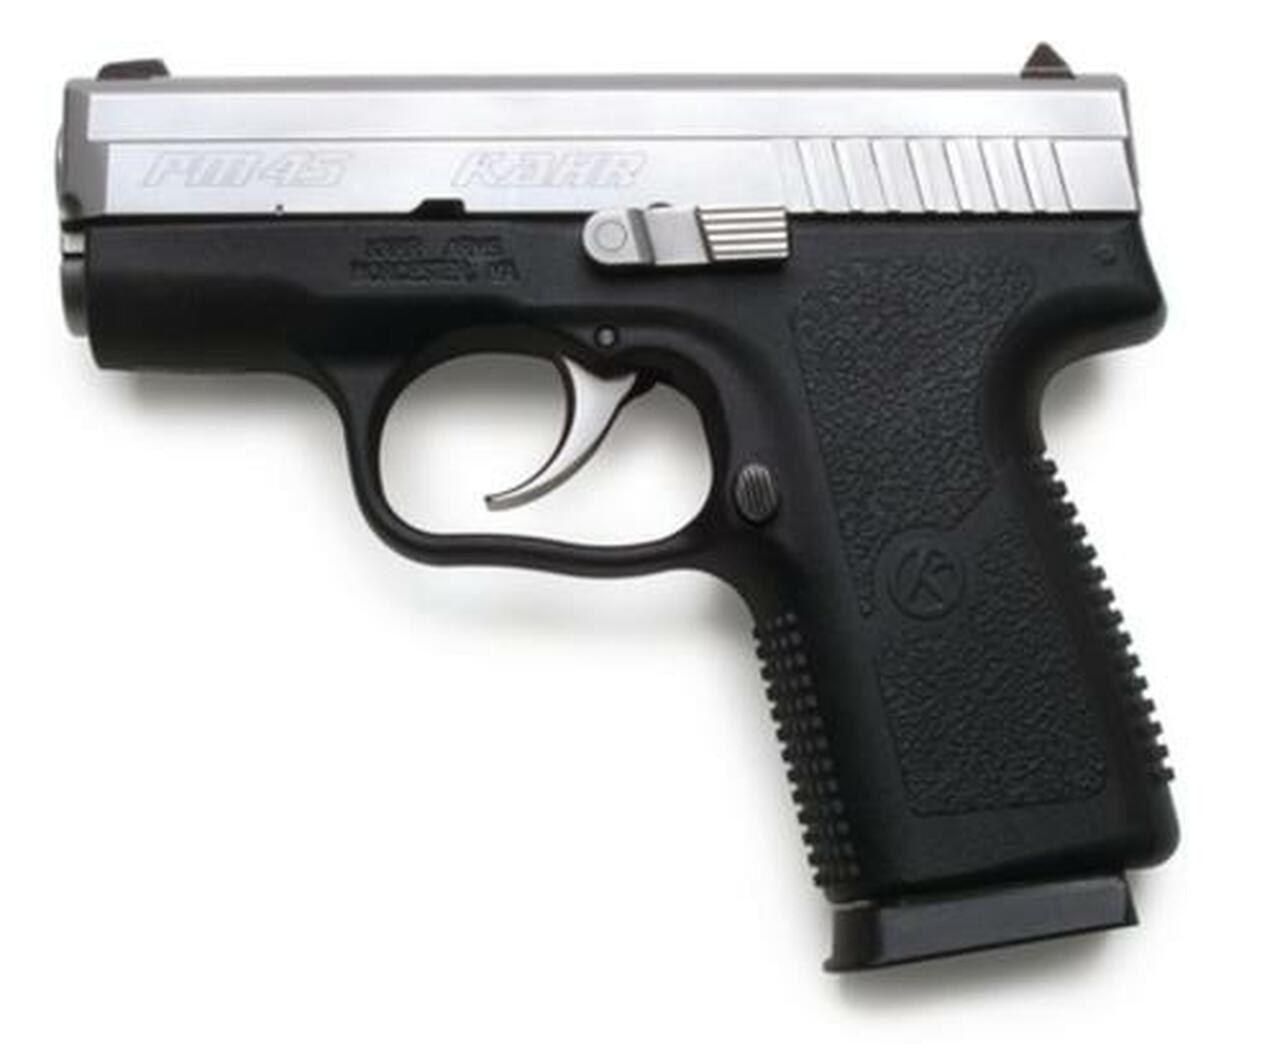 Image of Kahr Arms PM45 45 ACP, 3.1" Barrel, Poly/Stainless Steel